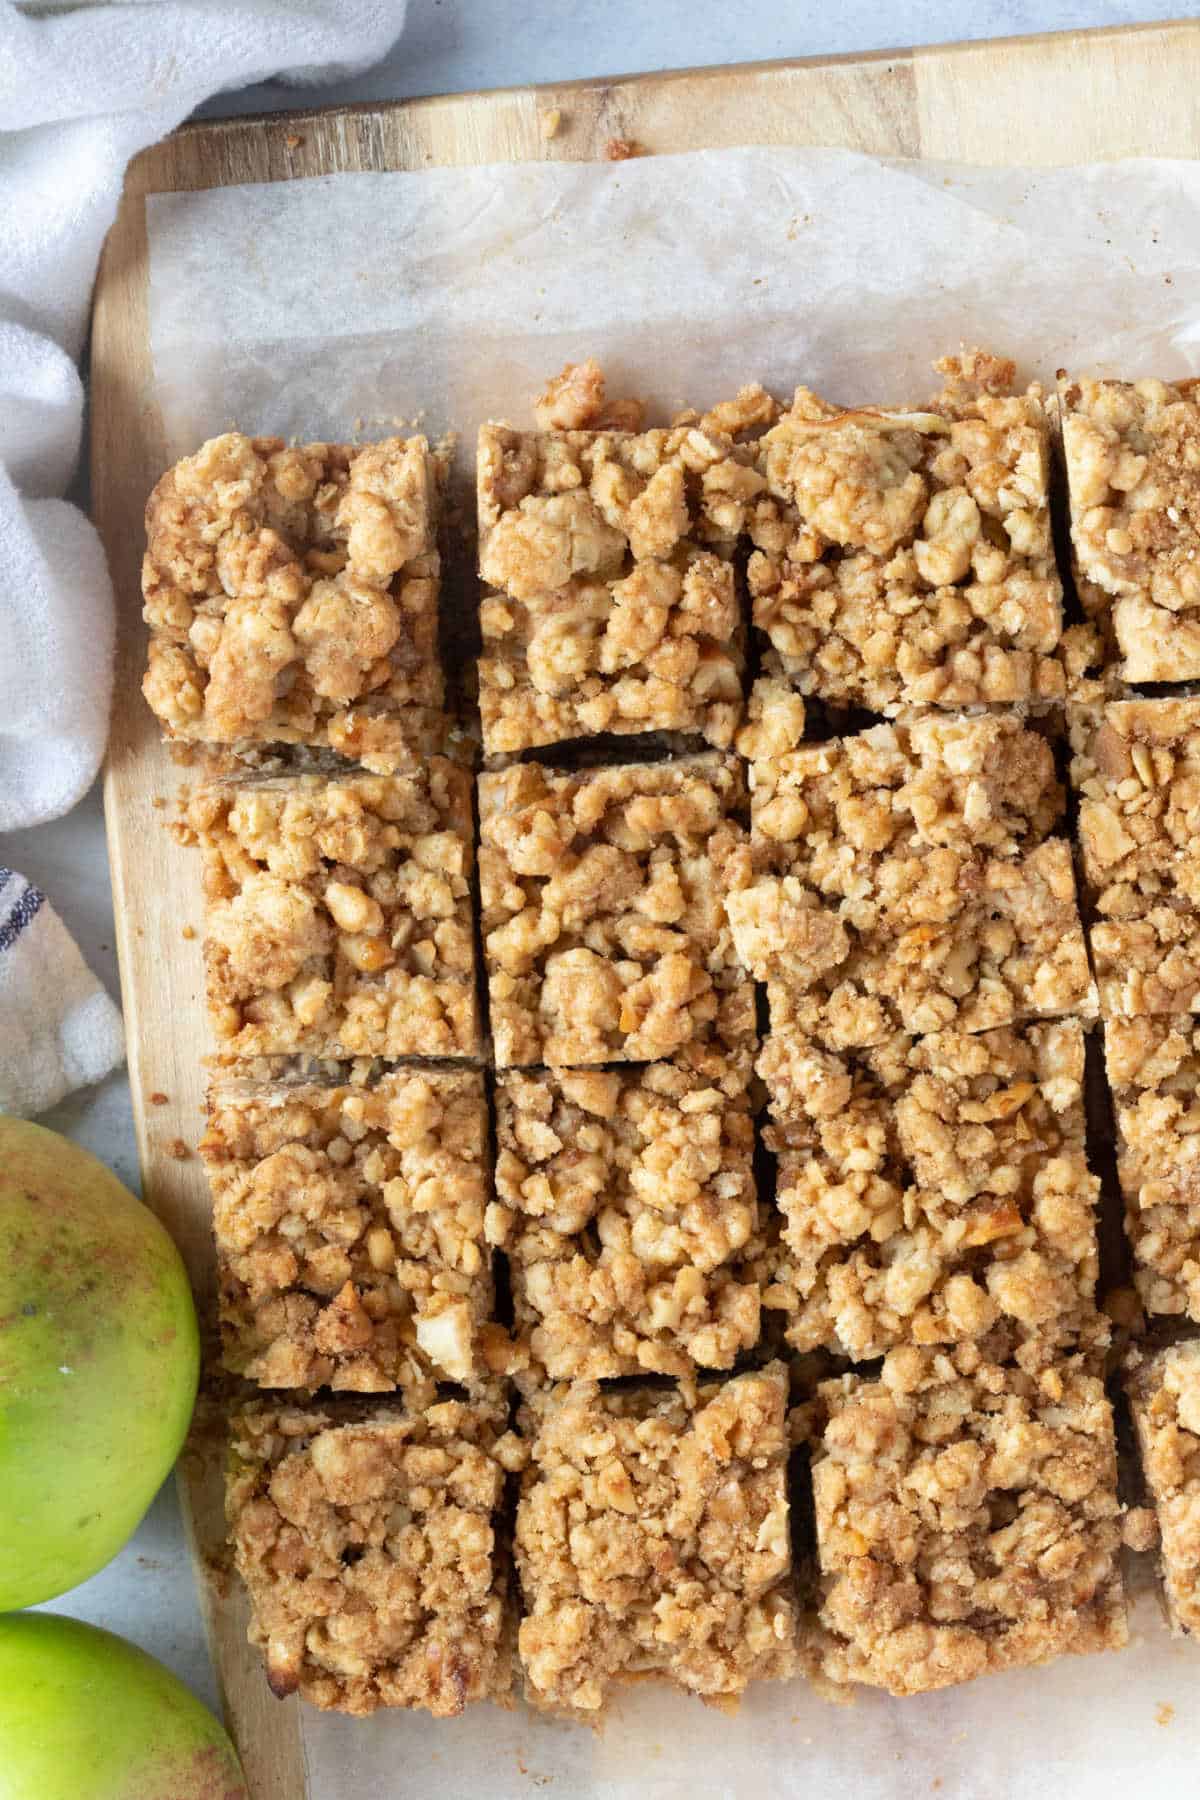 Apple crumble bars cut into slices on a wooden board.